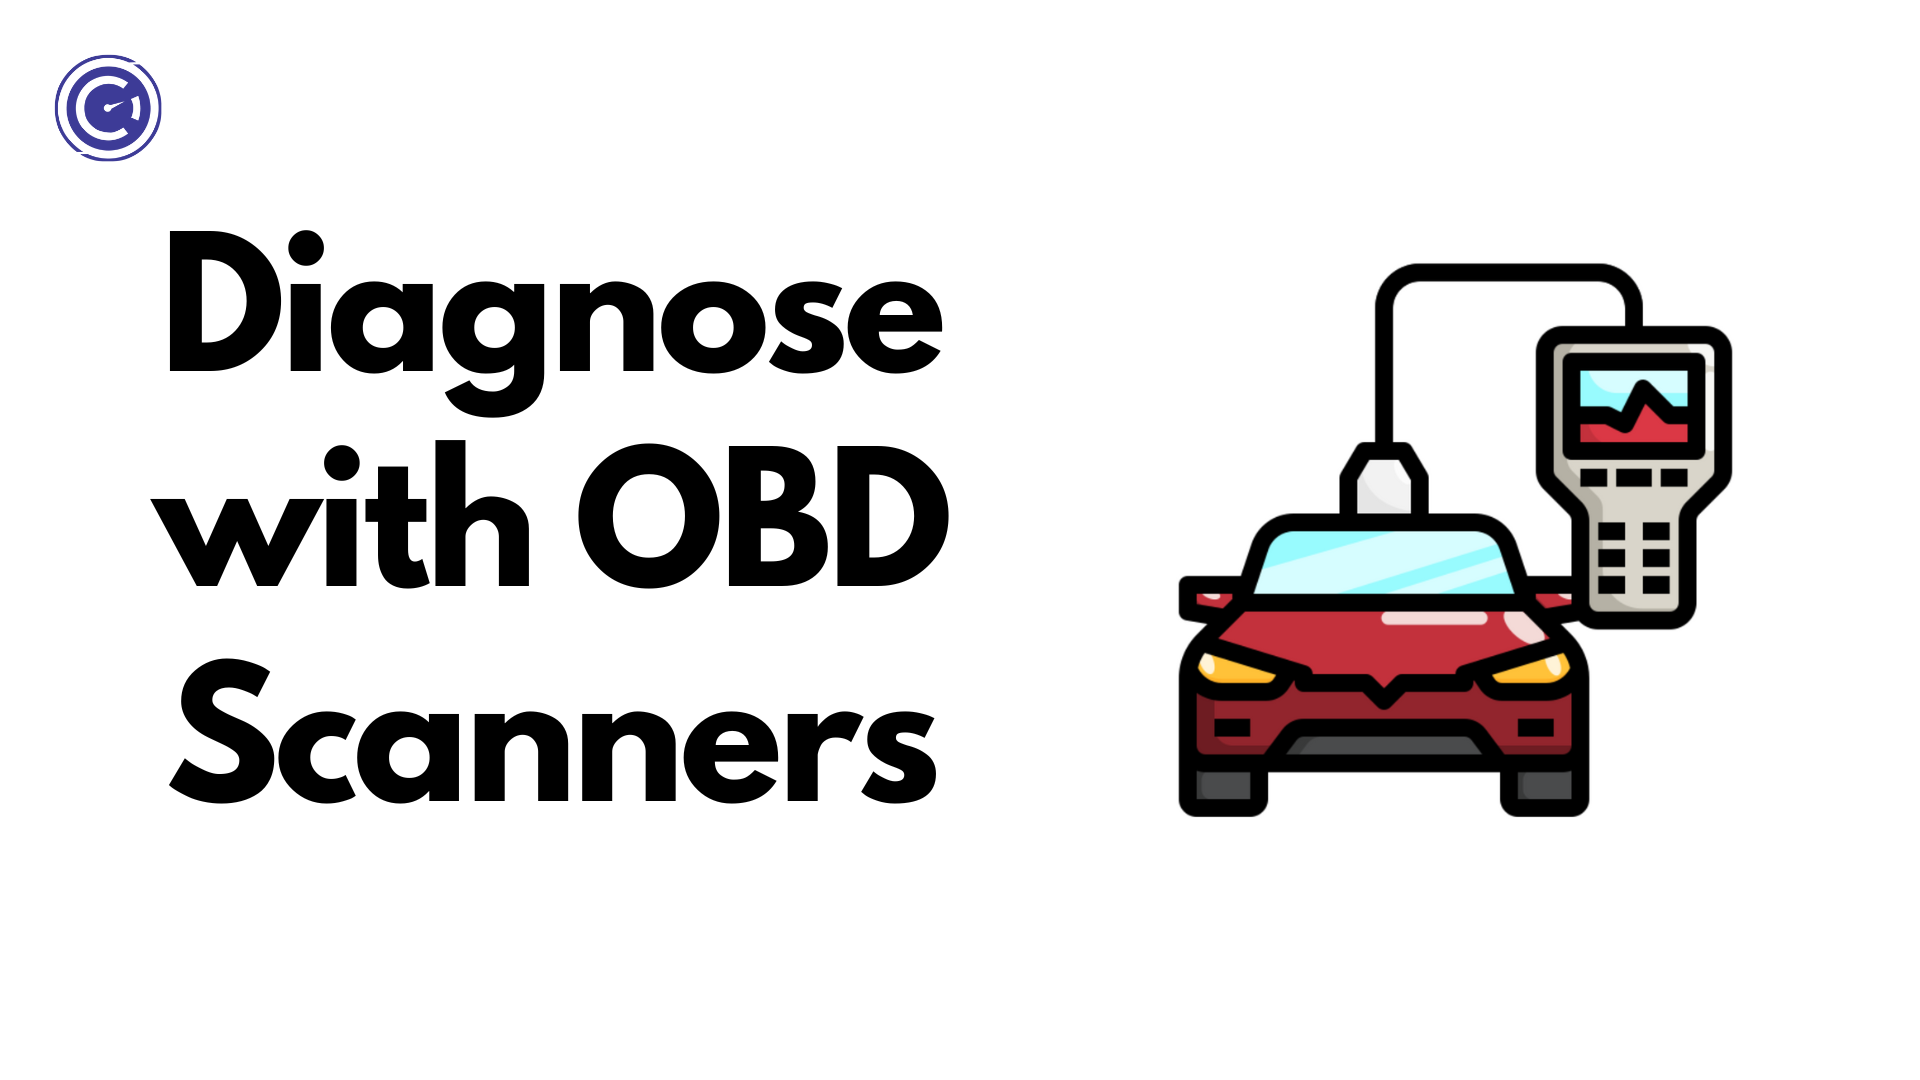 Diagnose with OBD Scanners